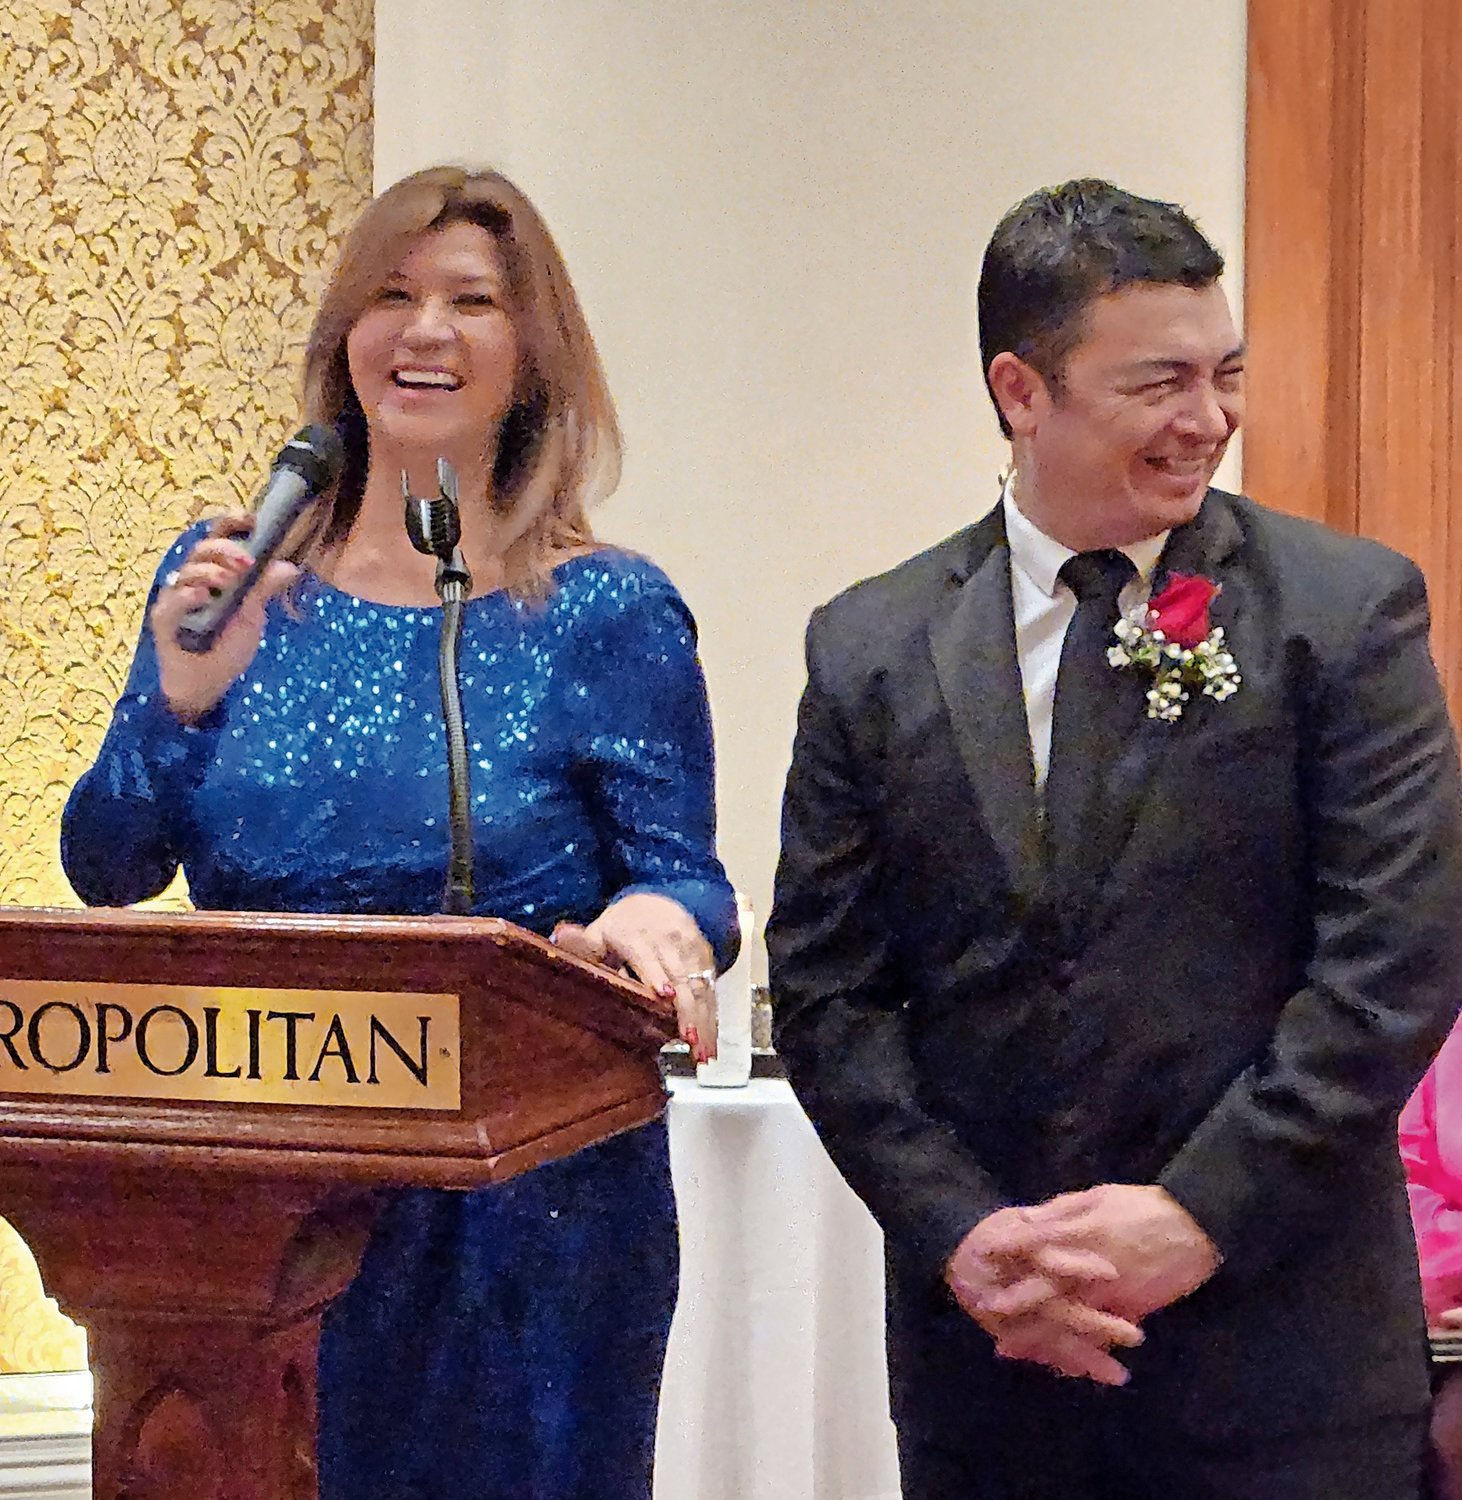 The North Shore Hispanic Chamber of Commerce’s new president, Constanza Pinilla, the first woman to lead the organization, and current President Ever Padilla attended a holiday gala at which notable chamber members were recognized.